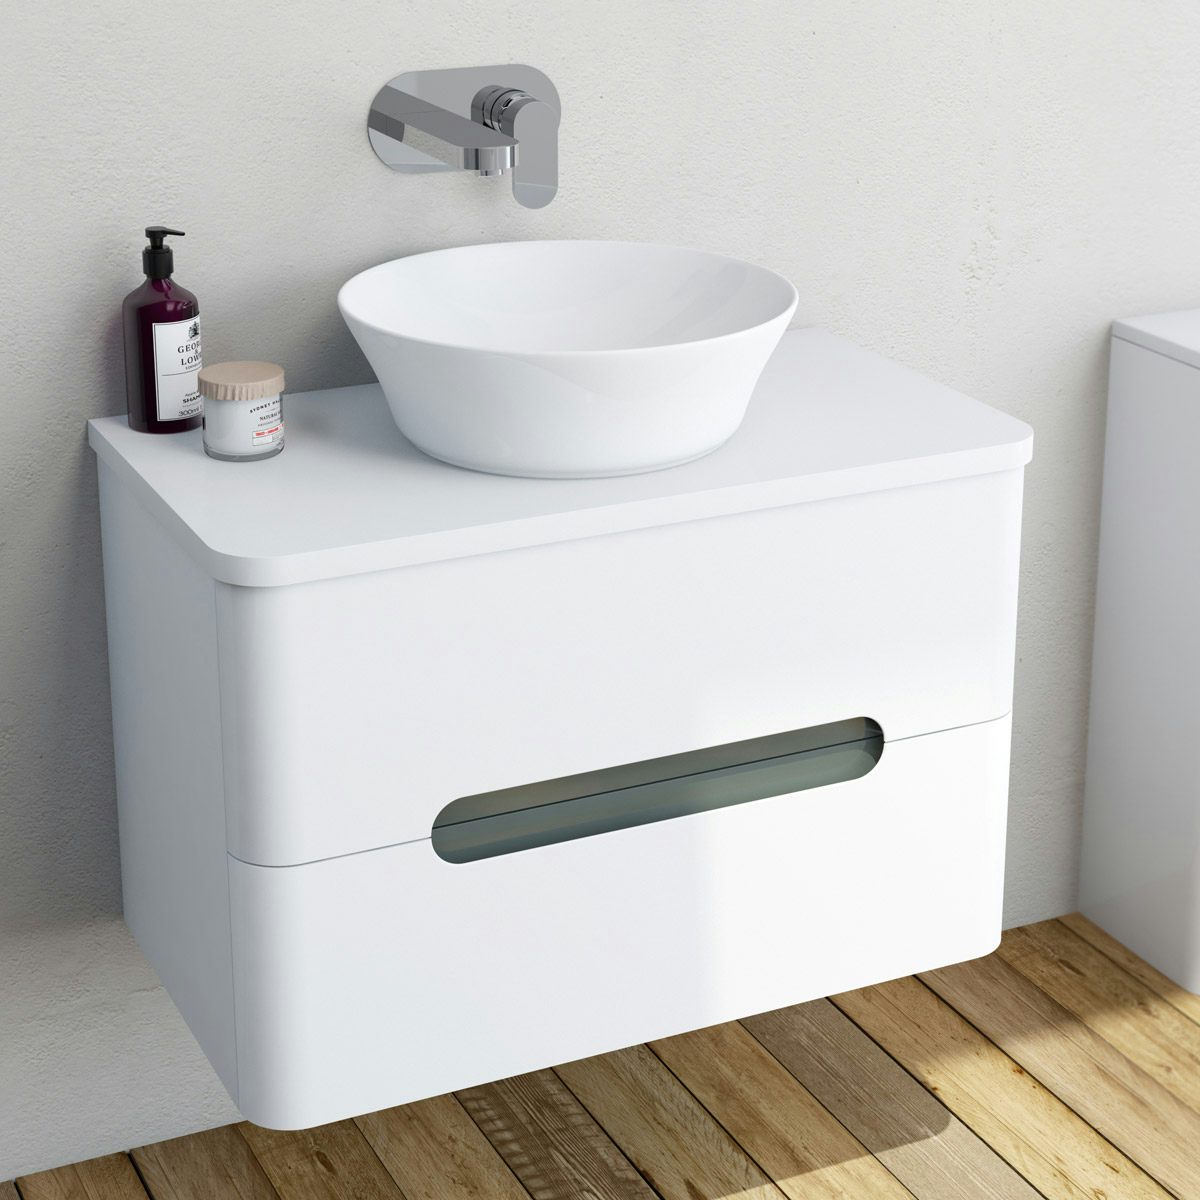 Omile 800mm Wall Hung White Ceramic Basin Sink Vanity Unit Nes Home